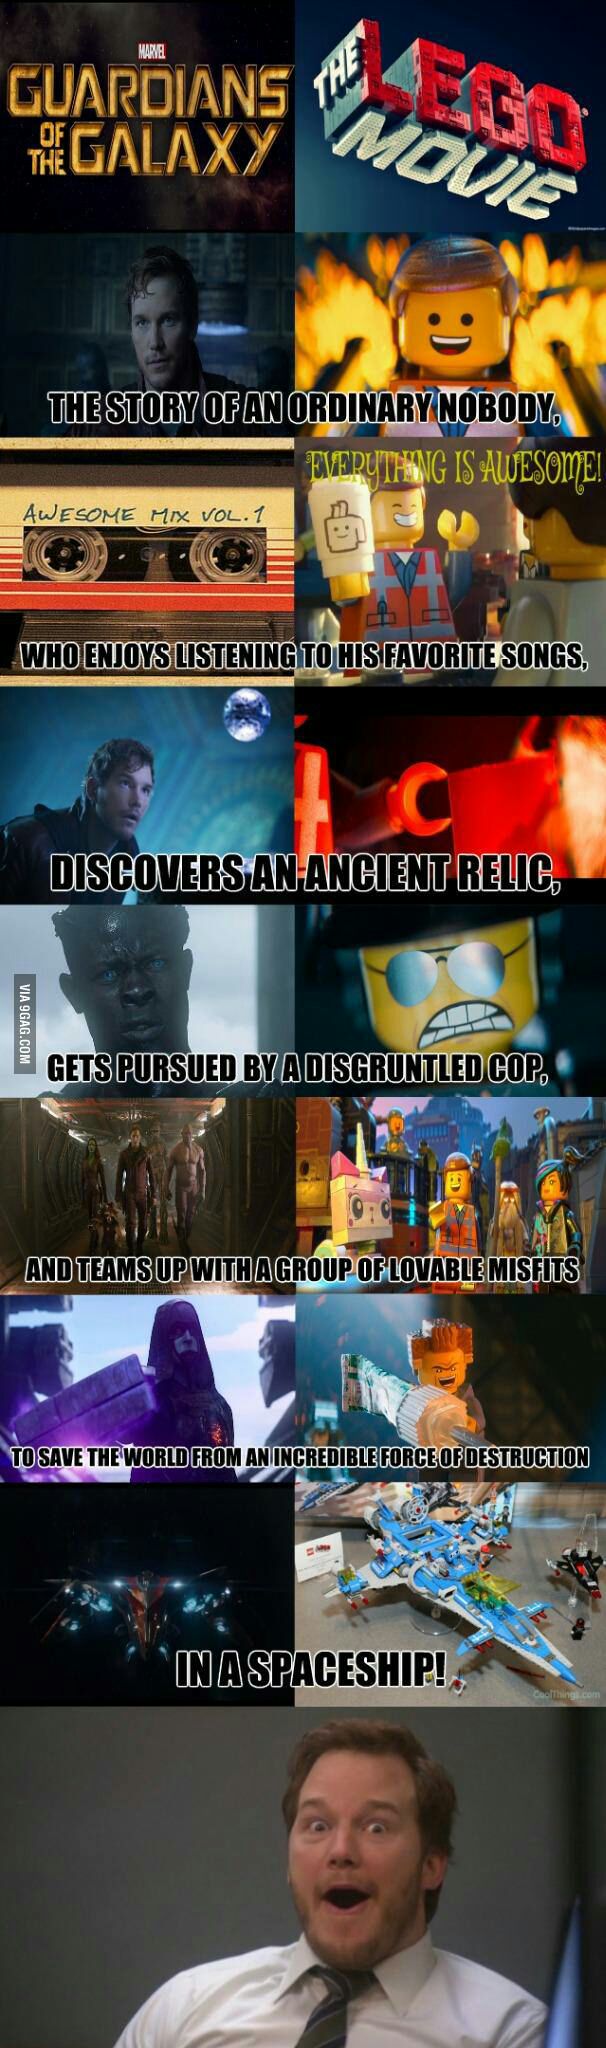 Holy shit, the Lego movie and guardians of the galaxy are the same movie